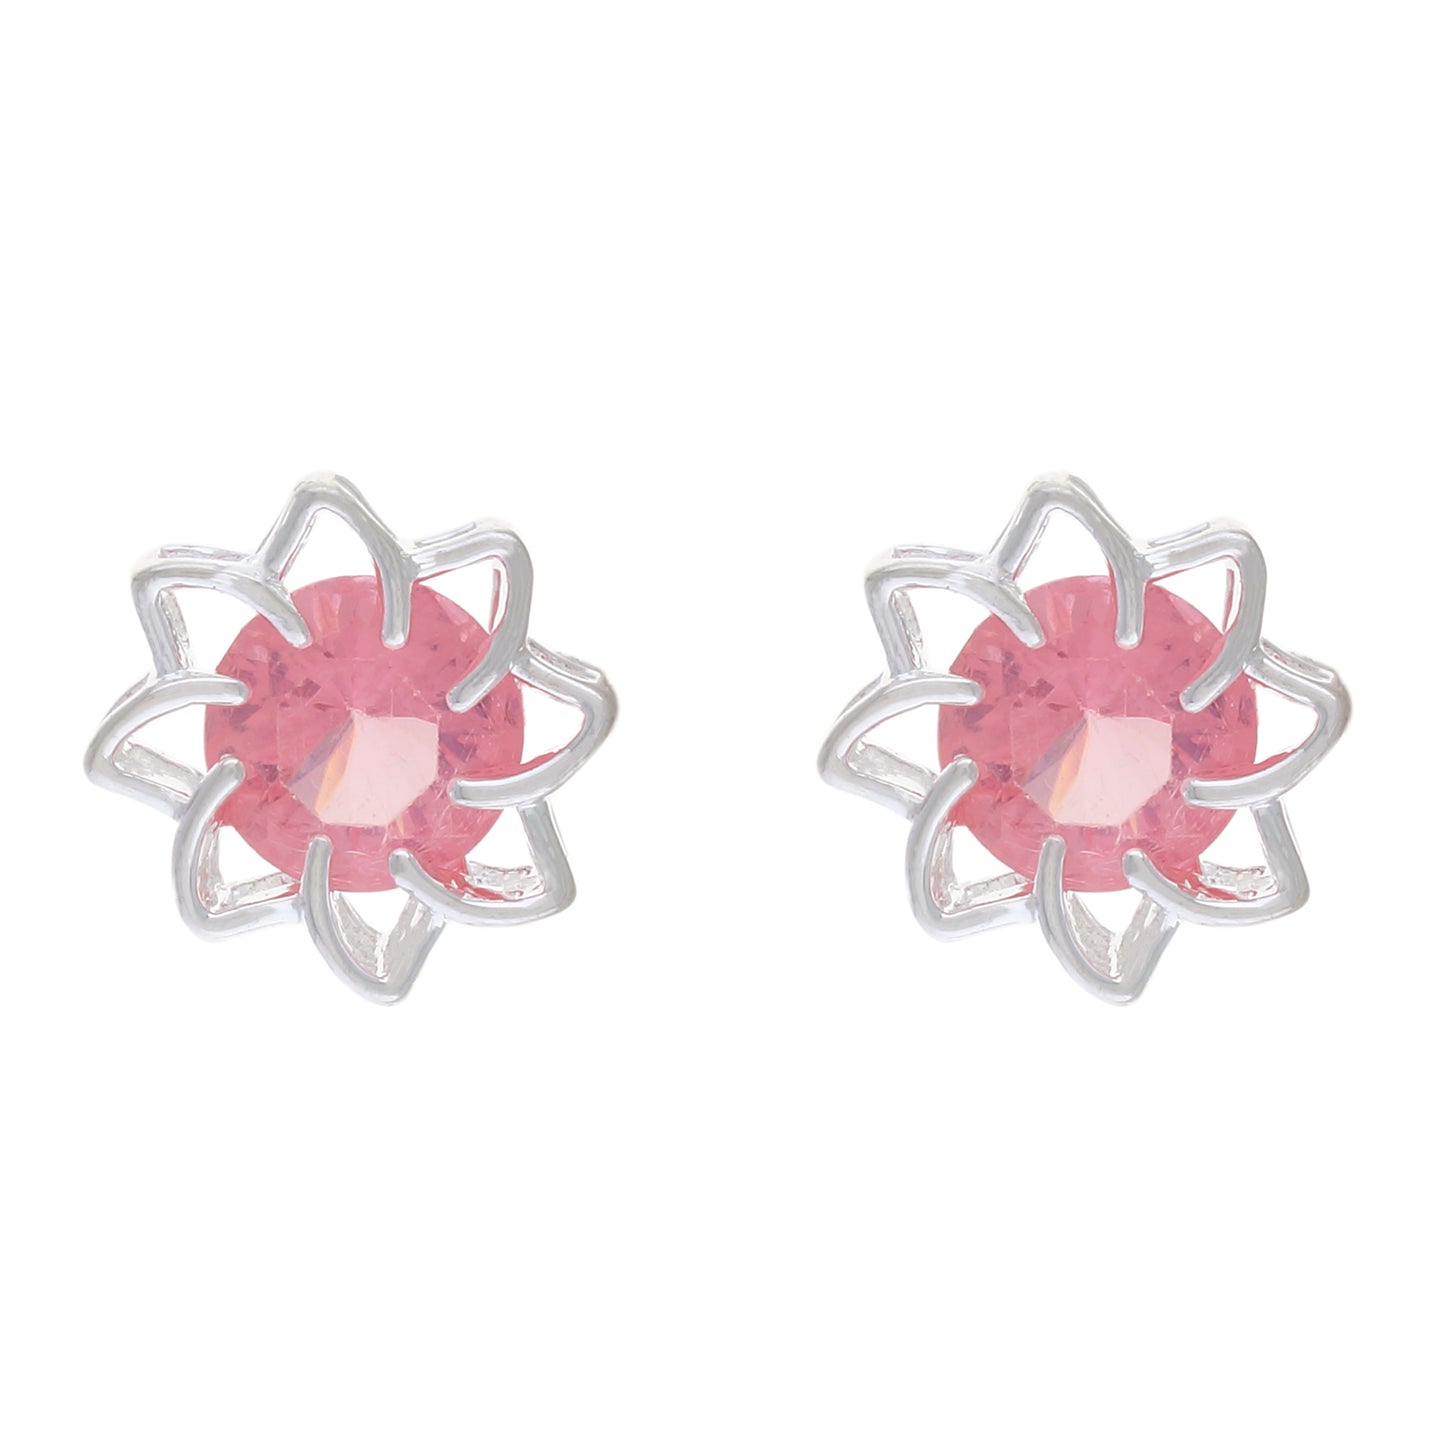 Pink colour Floral Design  Stud Earrings for Girls and Women